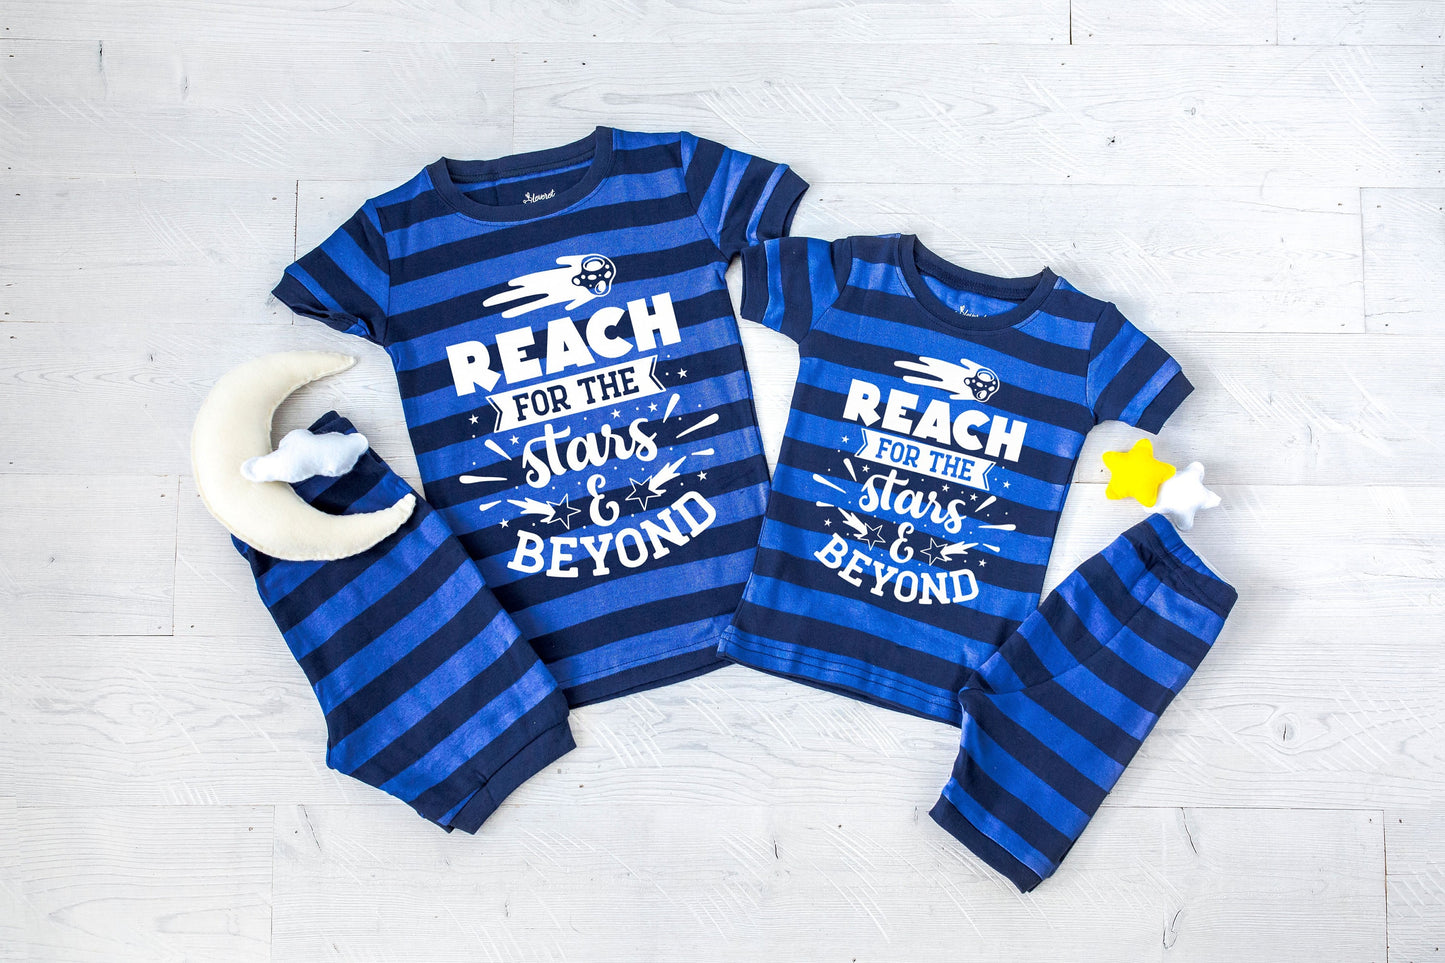 Reach for the Stars and Beyond Blue Striped Shorts Toddler and Youth Pajamas - Boys Pajamas - Sleepover Pajamas - Toddler Boy Summer Pajamas